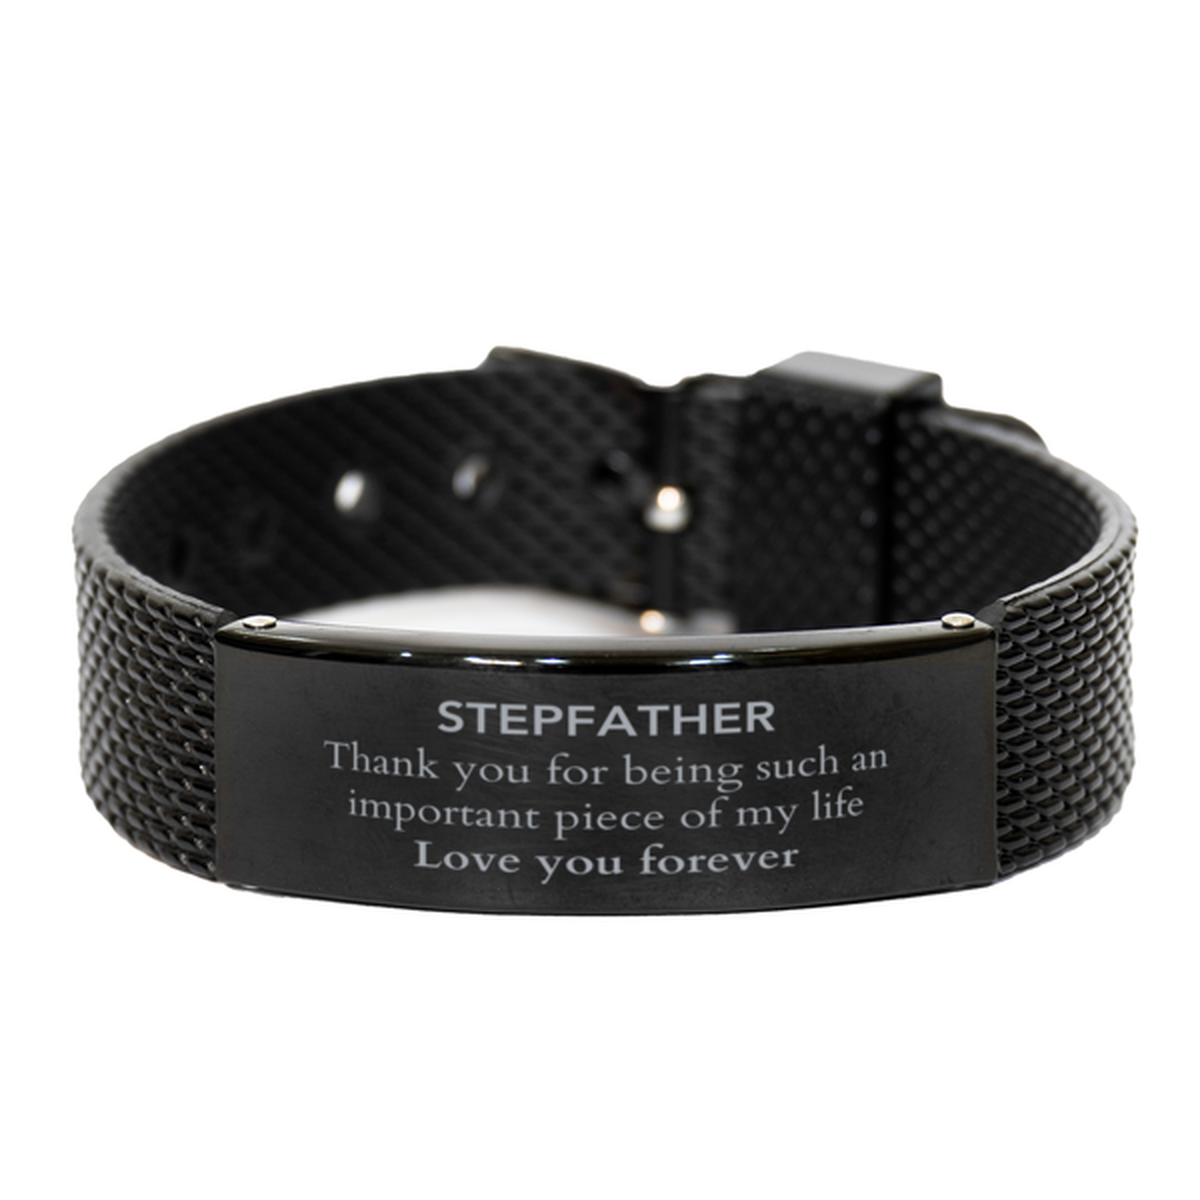 Appropriate Stepfather Black Shark Mesh Bracelet Epic Birthday Gifts for Stepfather Thank you for being such an important piece of my life Stepfather Christmas Mothers Fathers Day